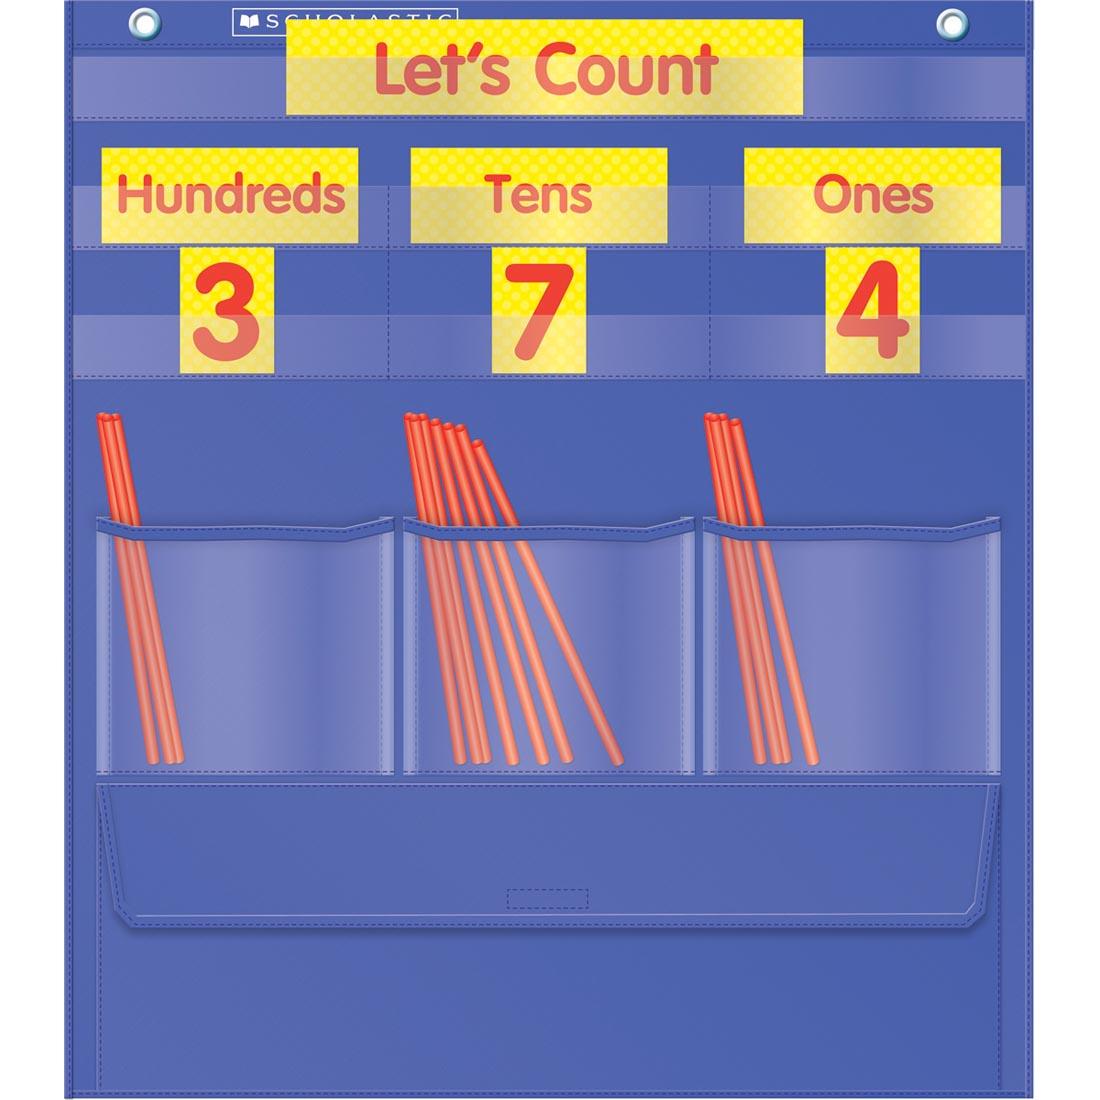 Counting Caddie and Place Value Pocket Chart shown in use with the included straws and the Let's Count header